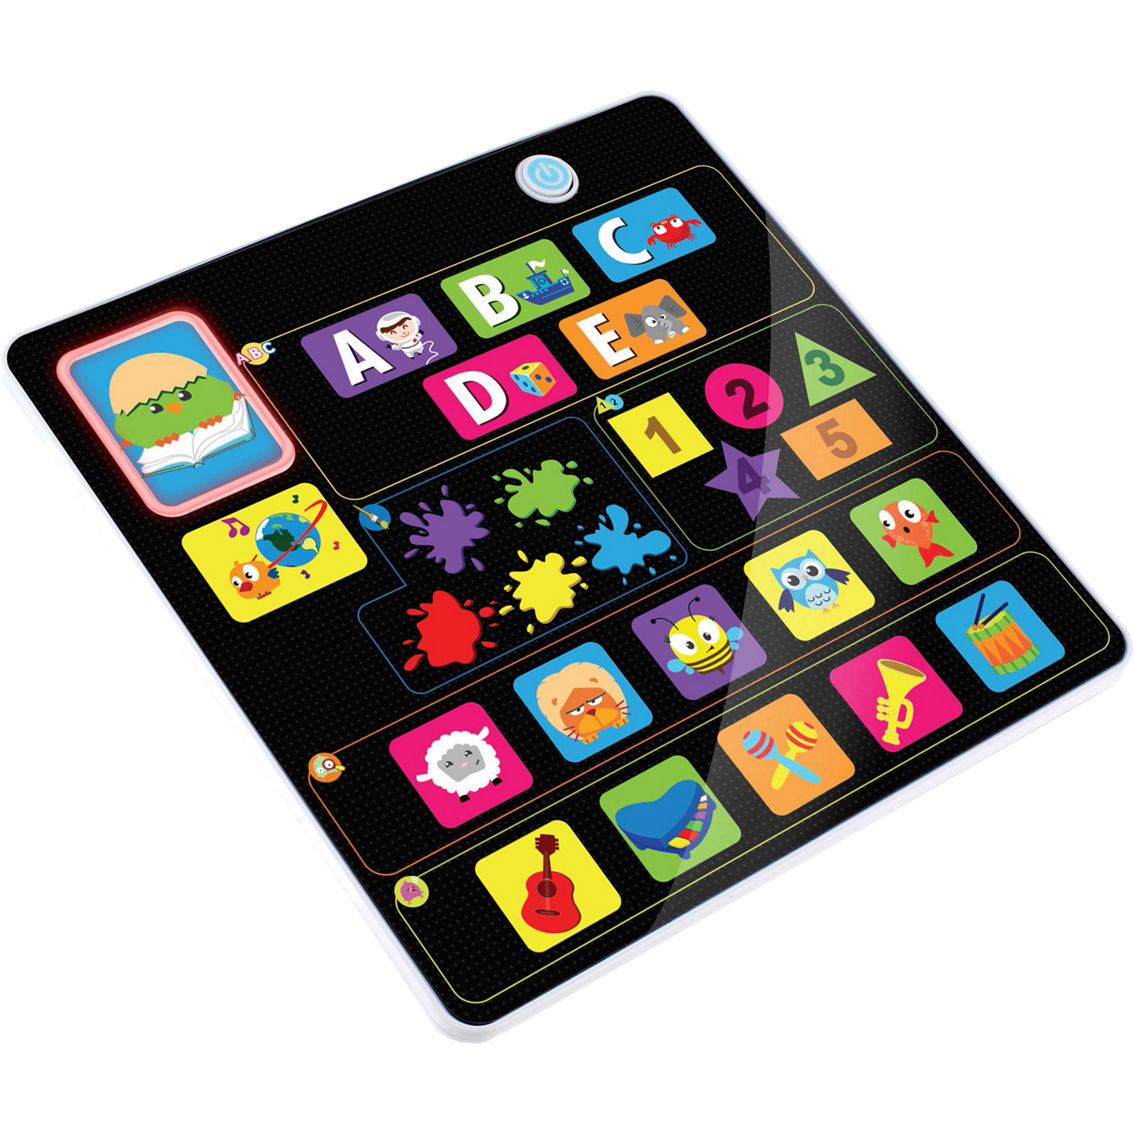 Kidz Delight Smooth Touch Fun Tablet - Image 3 of 4